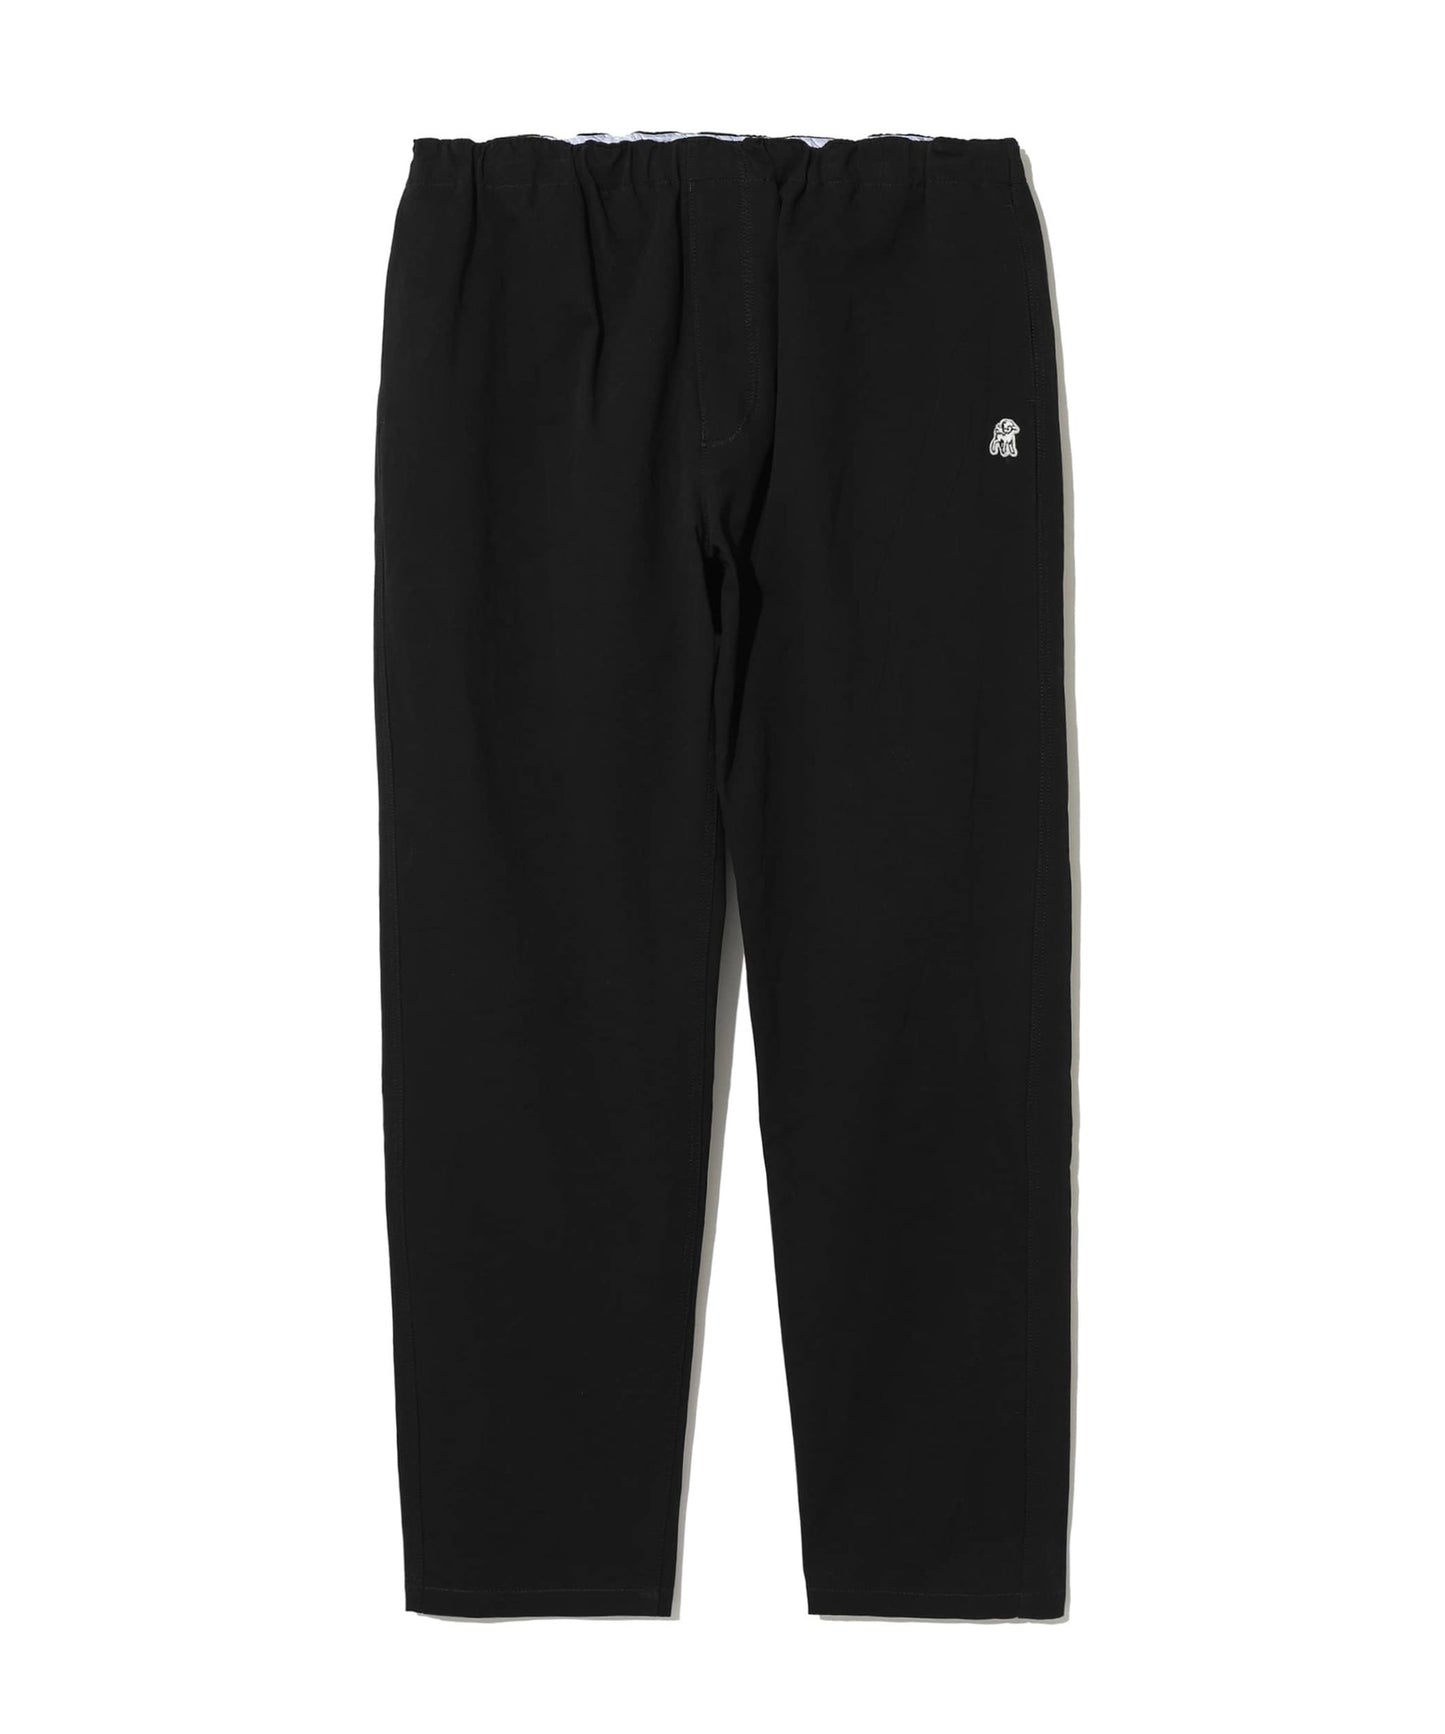 Undercover the Shepherd Black Trousers